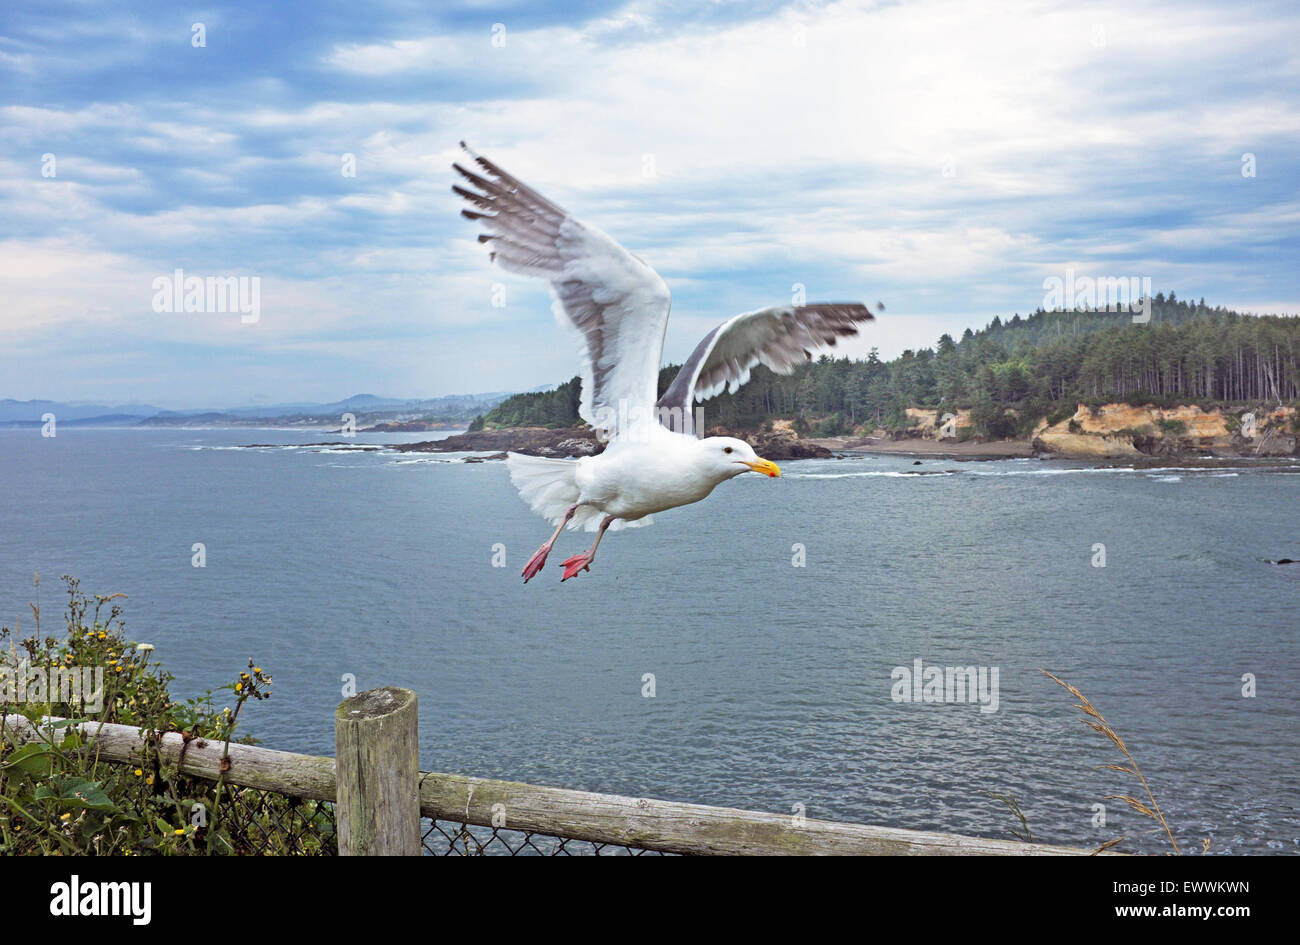 A seagull flying over the Pacific Ocean along the Oregon Pacific Coast at a state park. Stock Photo